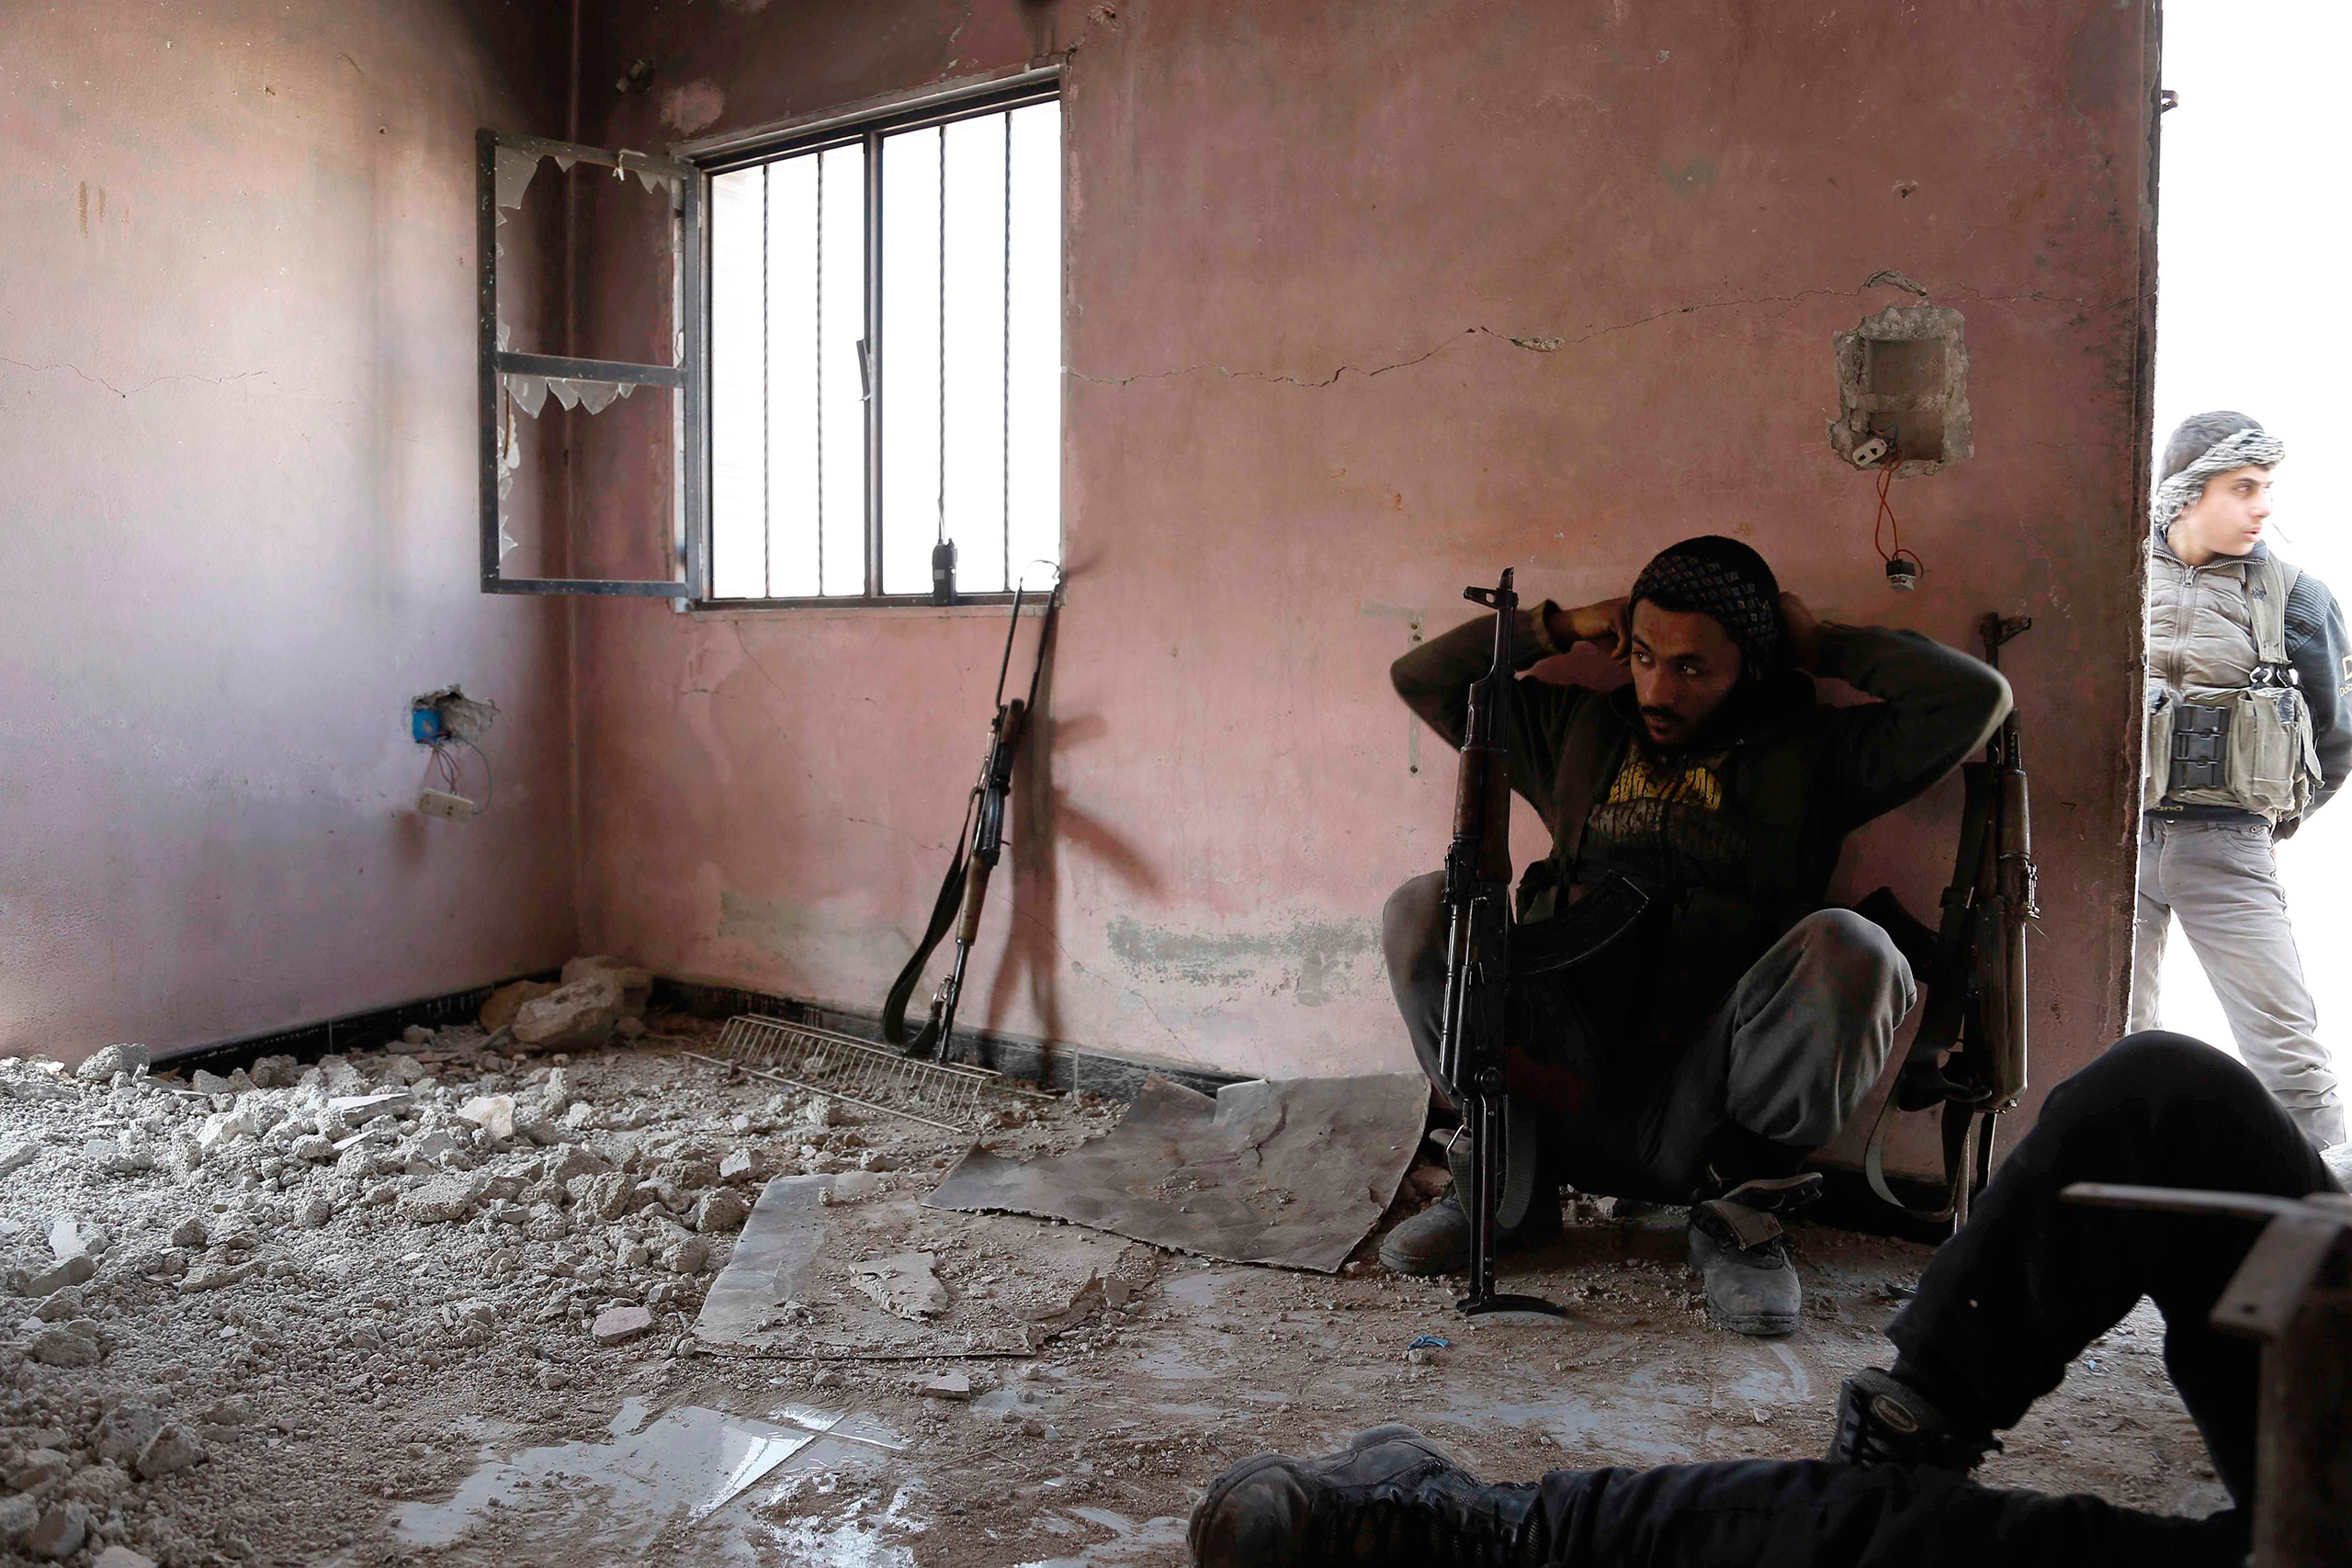 Rebel fighters from the Failaq al-Rahman brigade take a break as they hide inside a building on the frontline against regime forces in the rebel-controlled village of Bala, on the outskirts of Damascus, Syria, Feb. 28, 2016. (Abdulmonam Eassa—AFP/Getty Images)